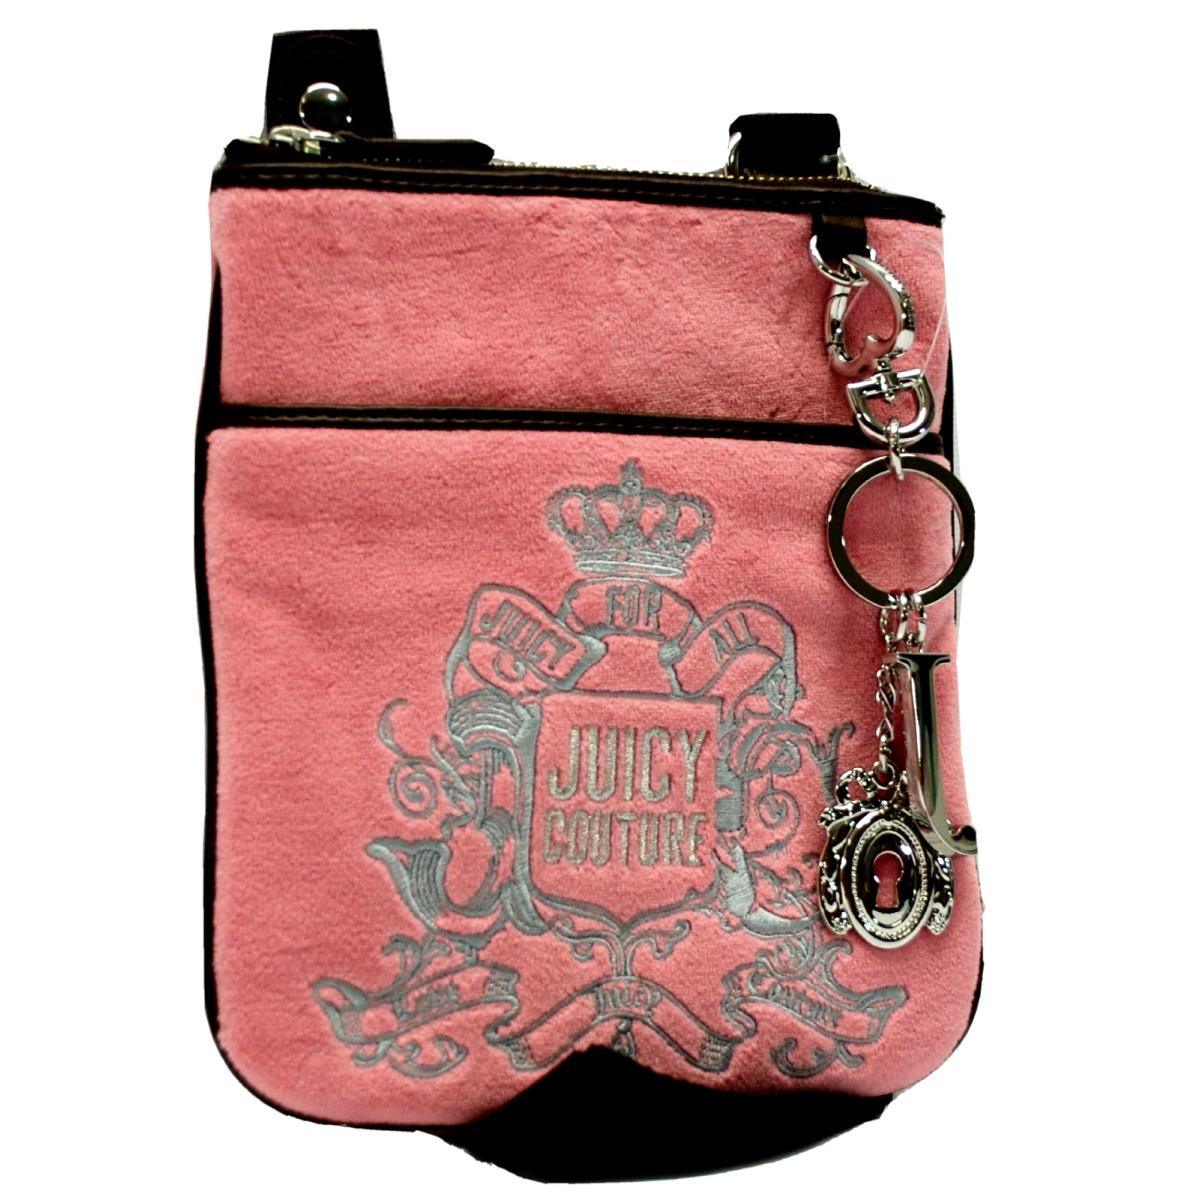 Stylish Pink Juicy Couture Wisteria Baguette Across Body Bag